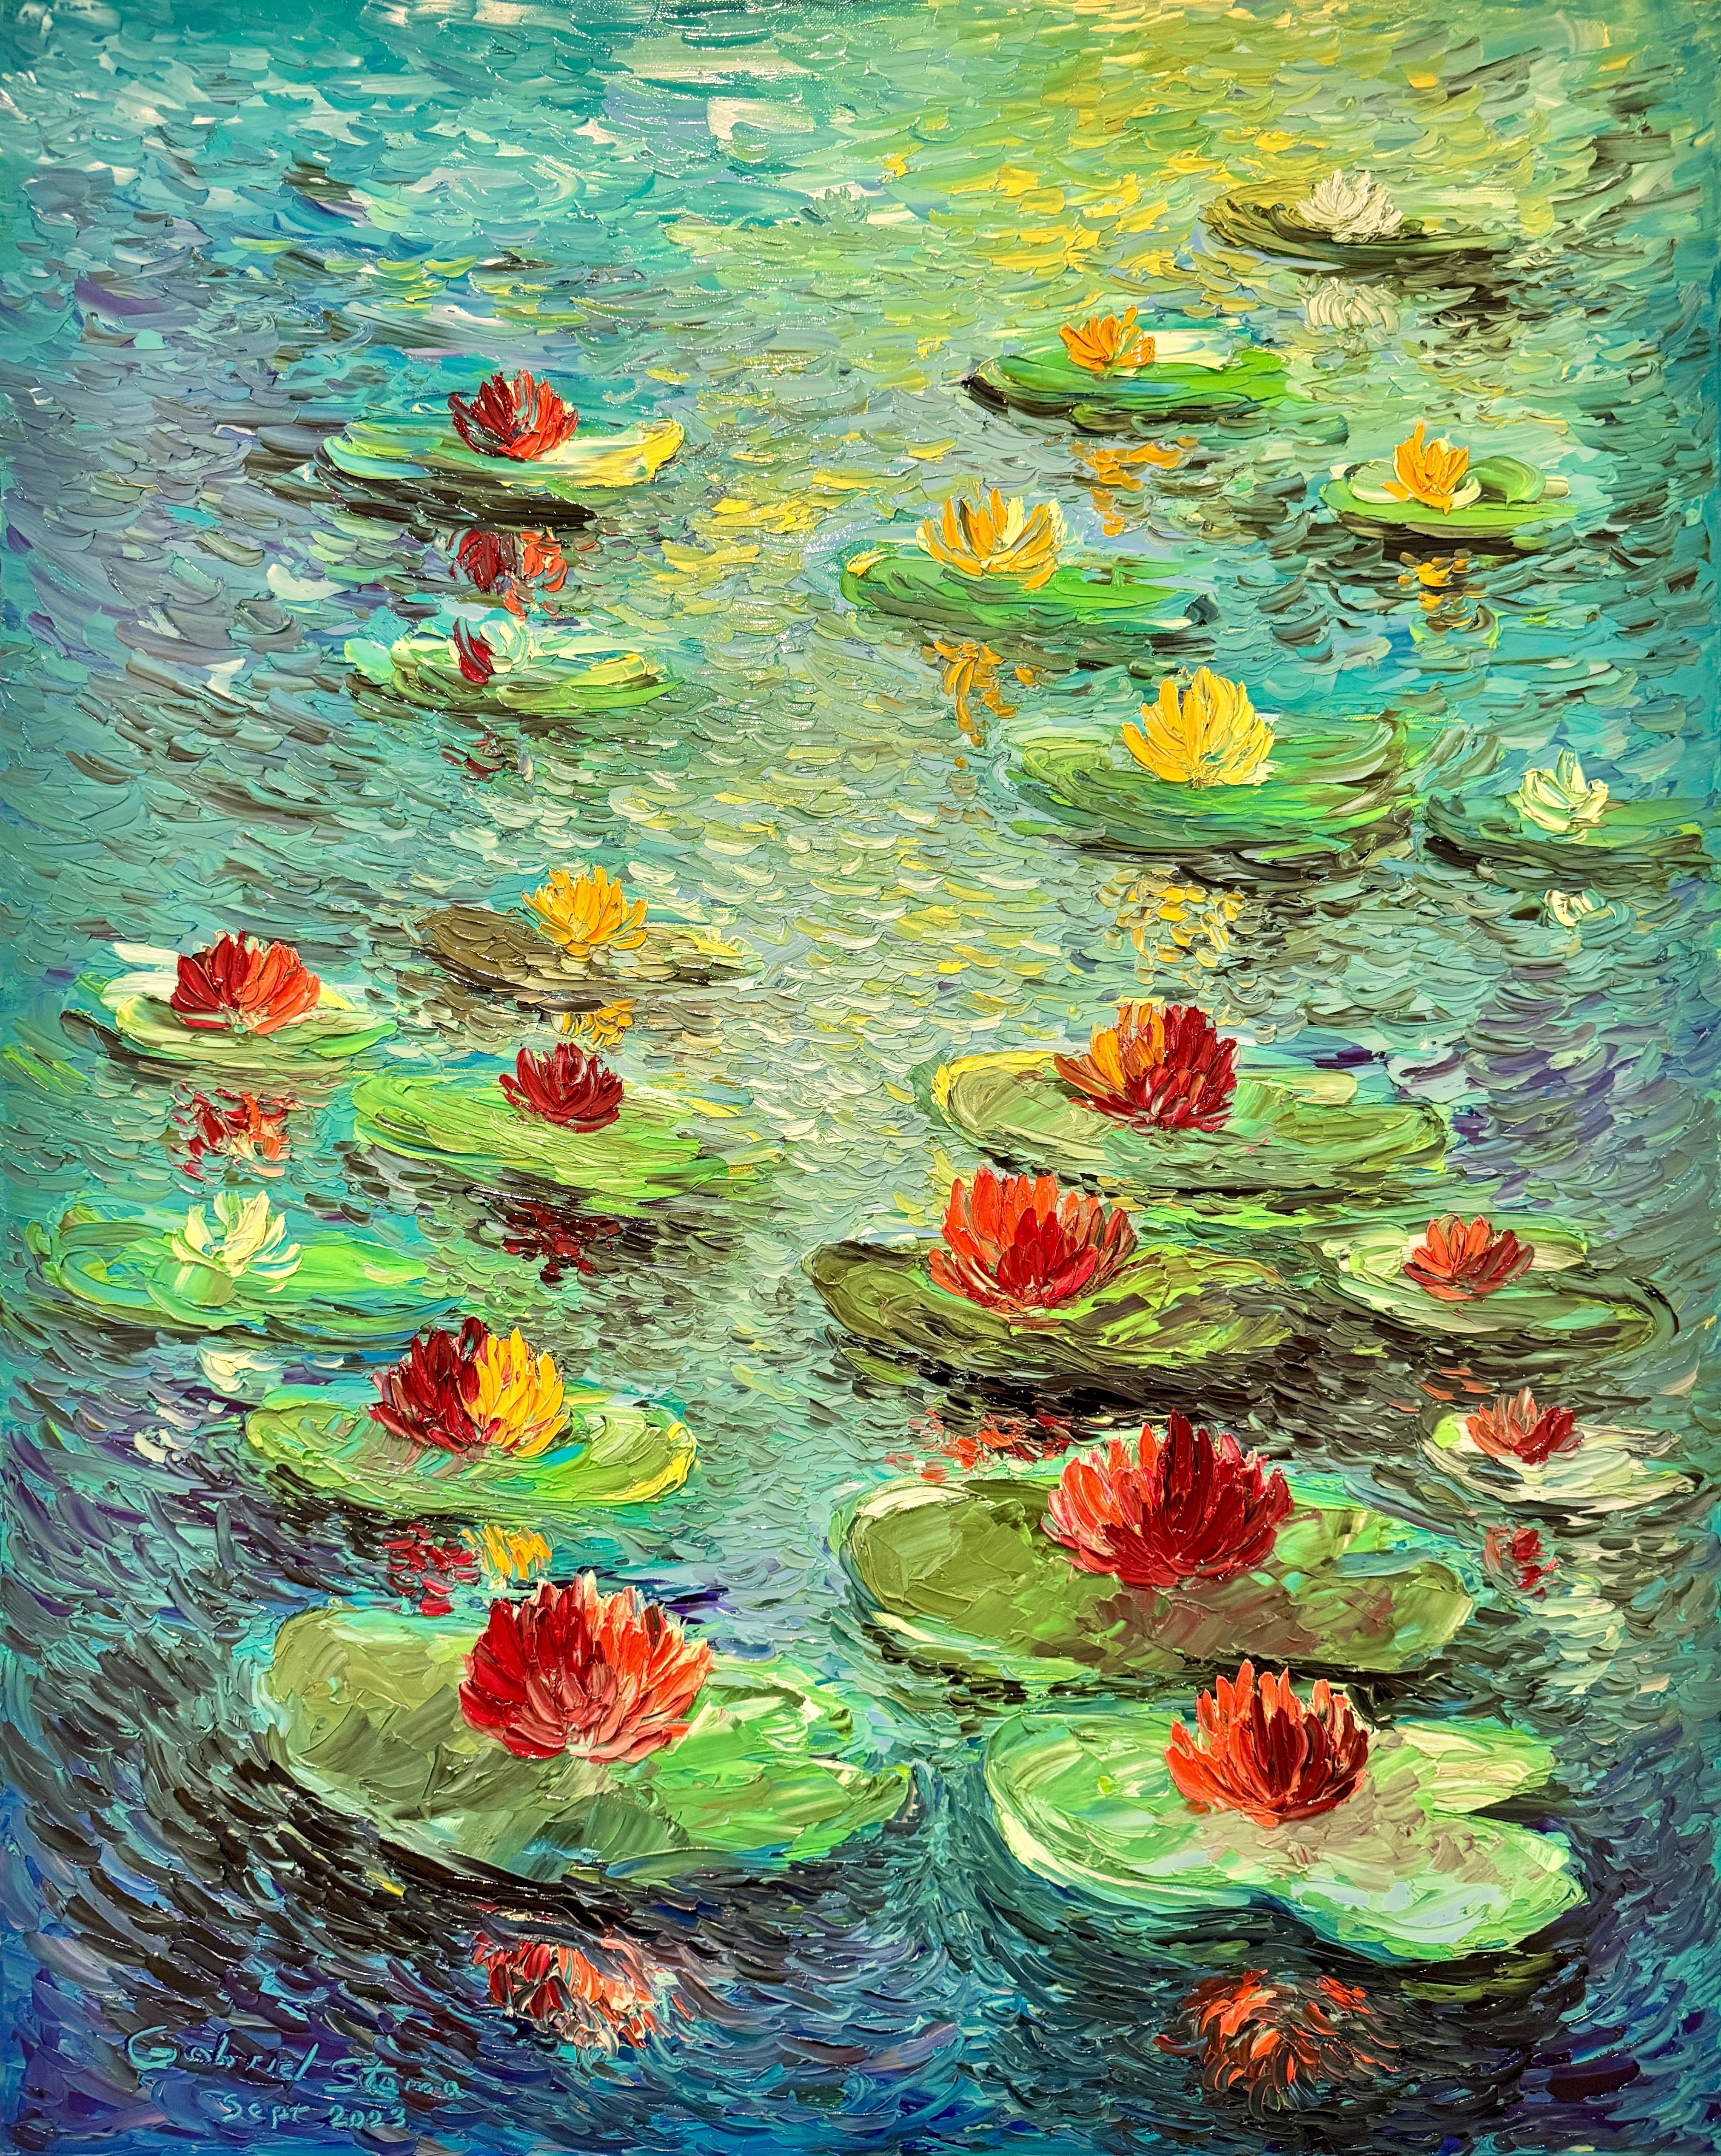 Gabriel Stama Figurative Painting - "Water Lilies", Large Oil Painting On Canvas, Petrino Style Artwork, Signed